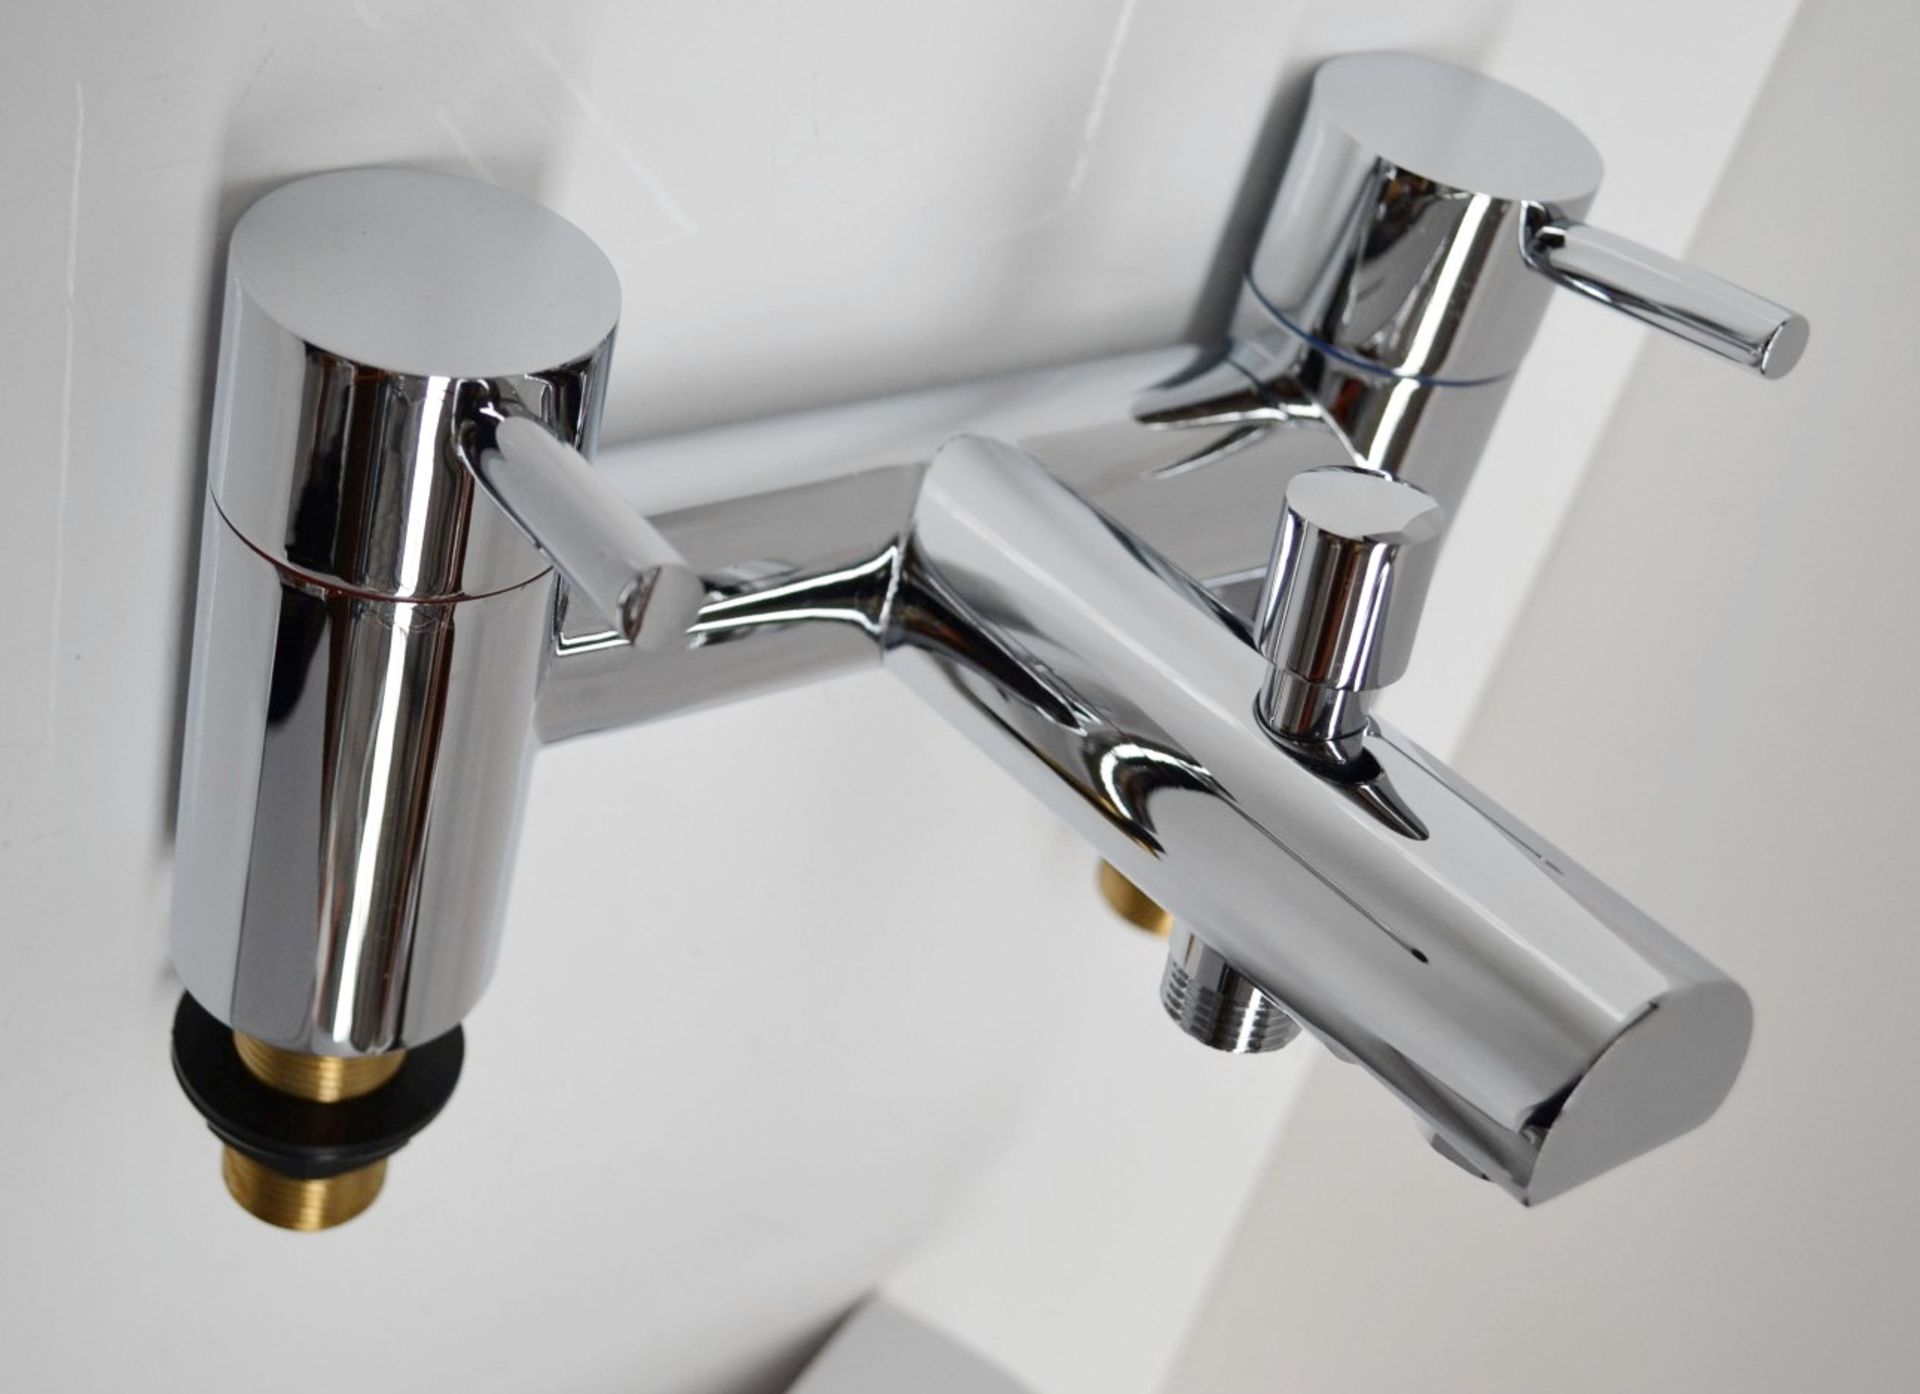 1 x Matrix Bath Mixer Tap - Featuring Modern Style With A Round Shape - Ref: MBI031 - CL190 - Unused - Image 8 of 8